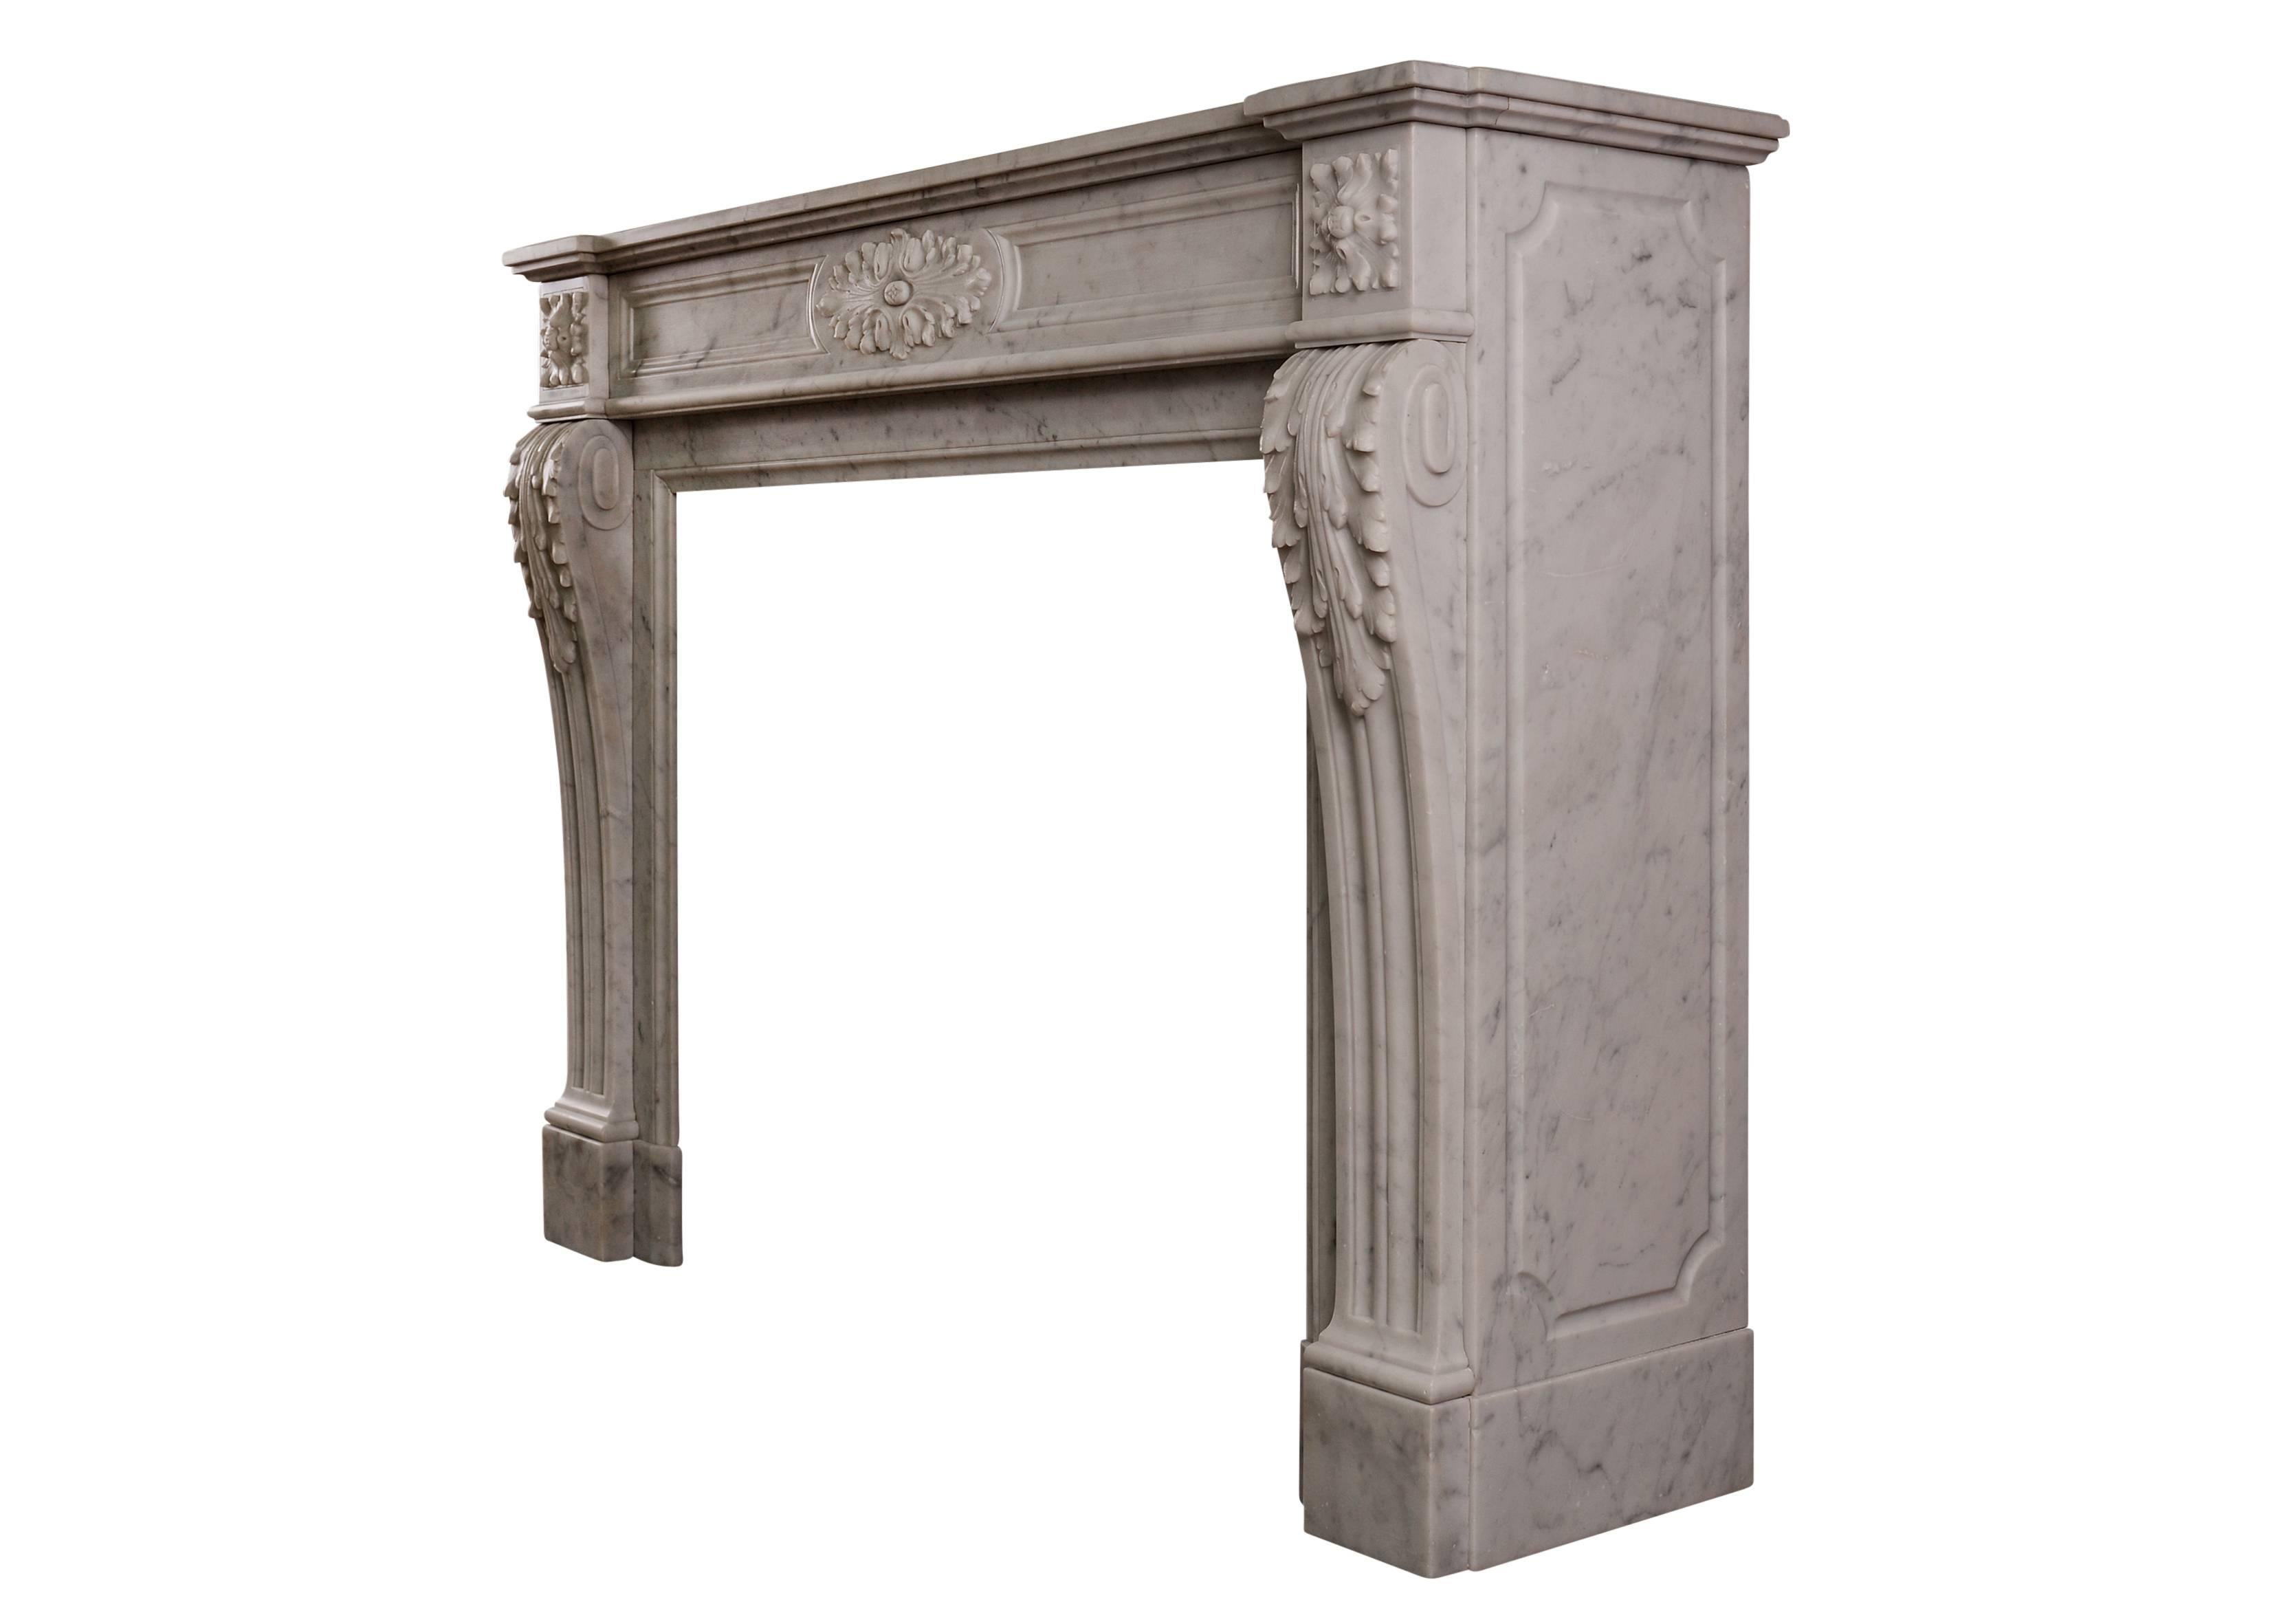 18th Century French Carrara Marble Fireplace in the Louis XVI Style